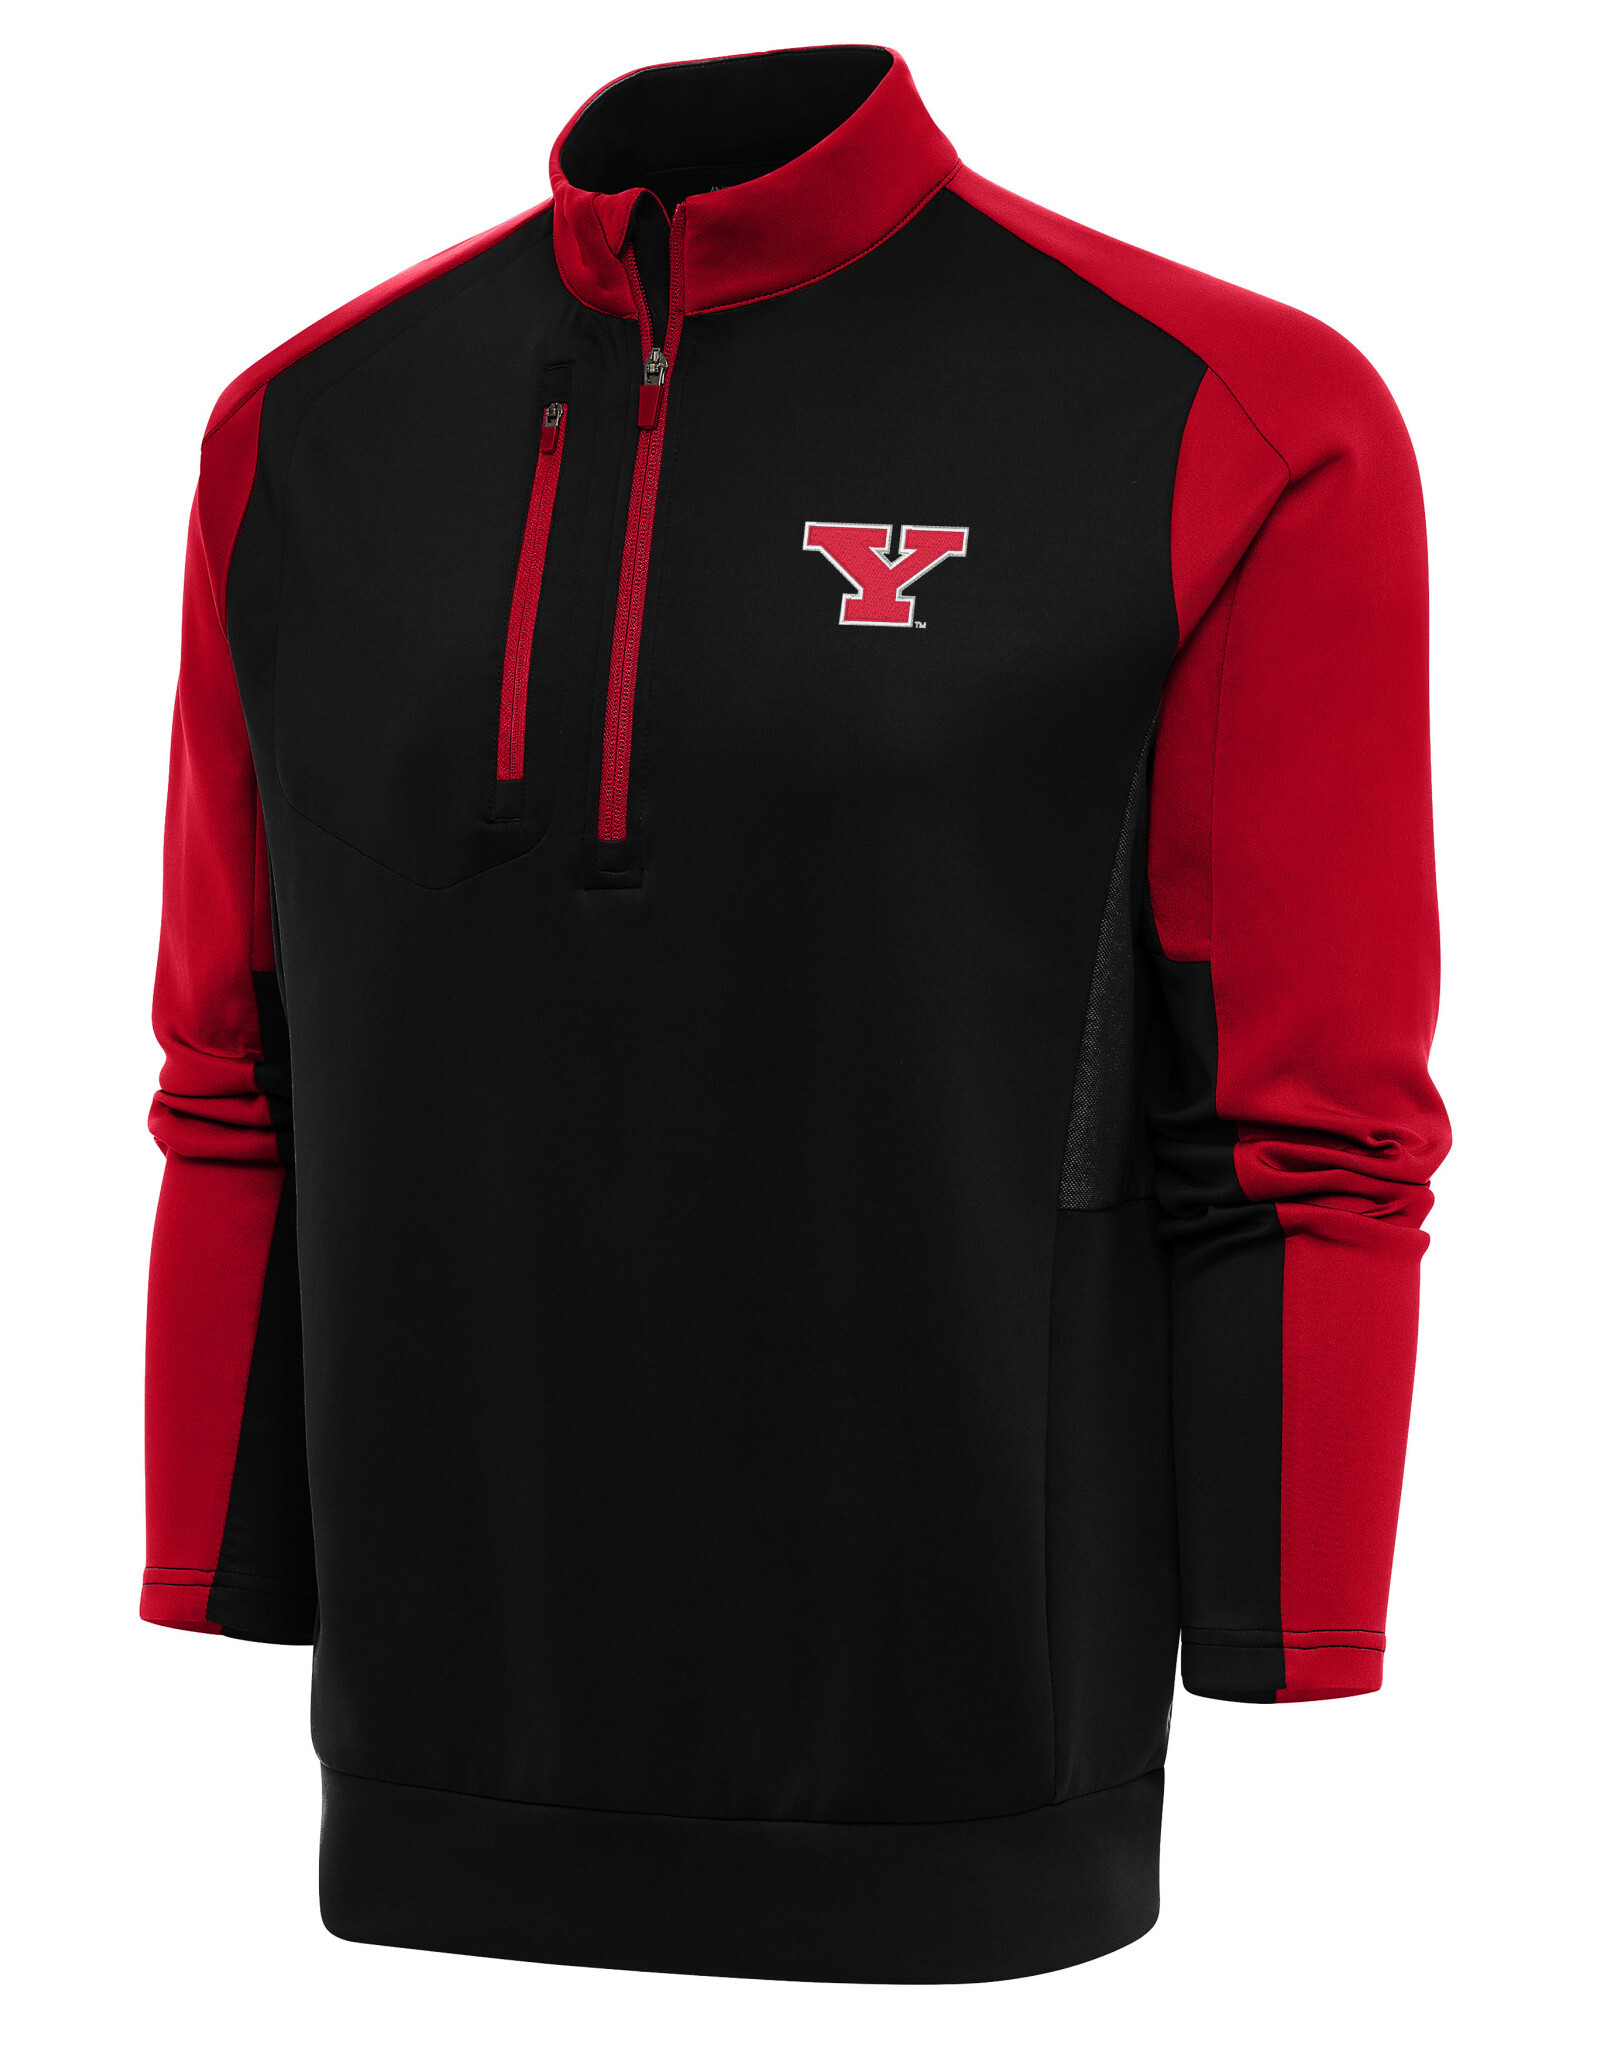 ANTIGUA Youngstown State Penguins Men's Team Quarter Zip Pullover Top - Red/Black